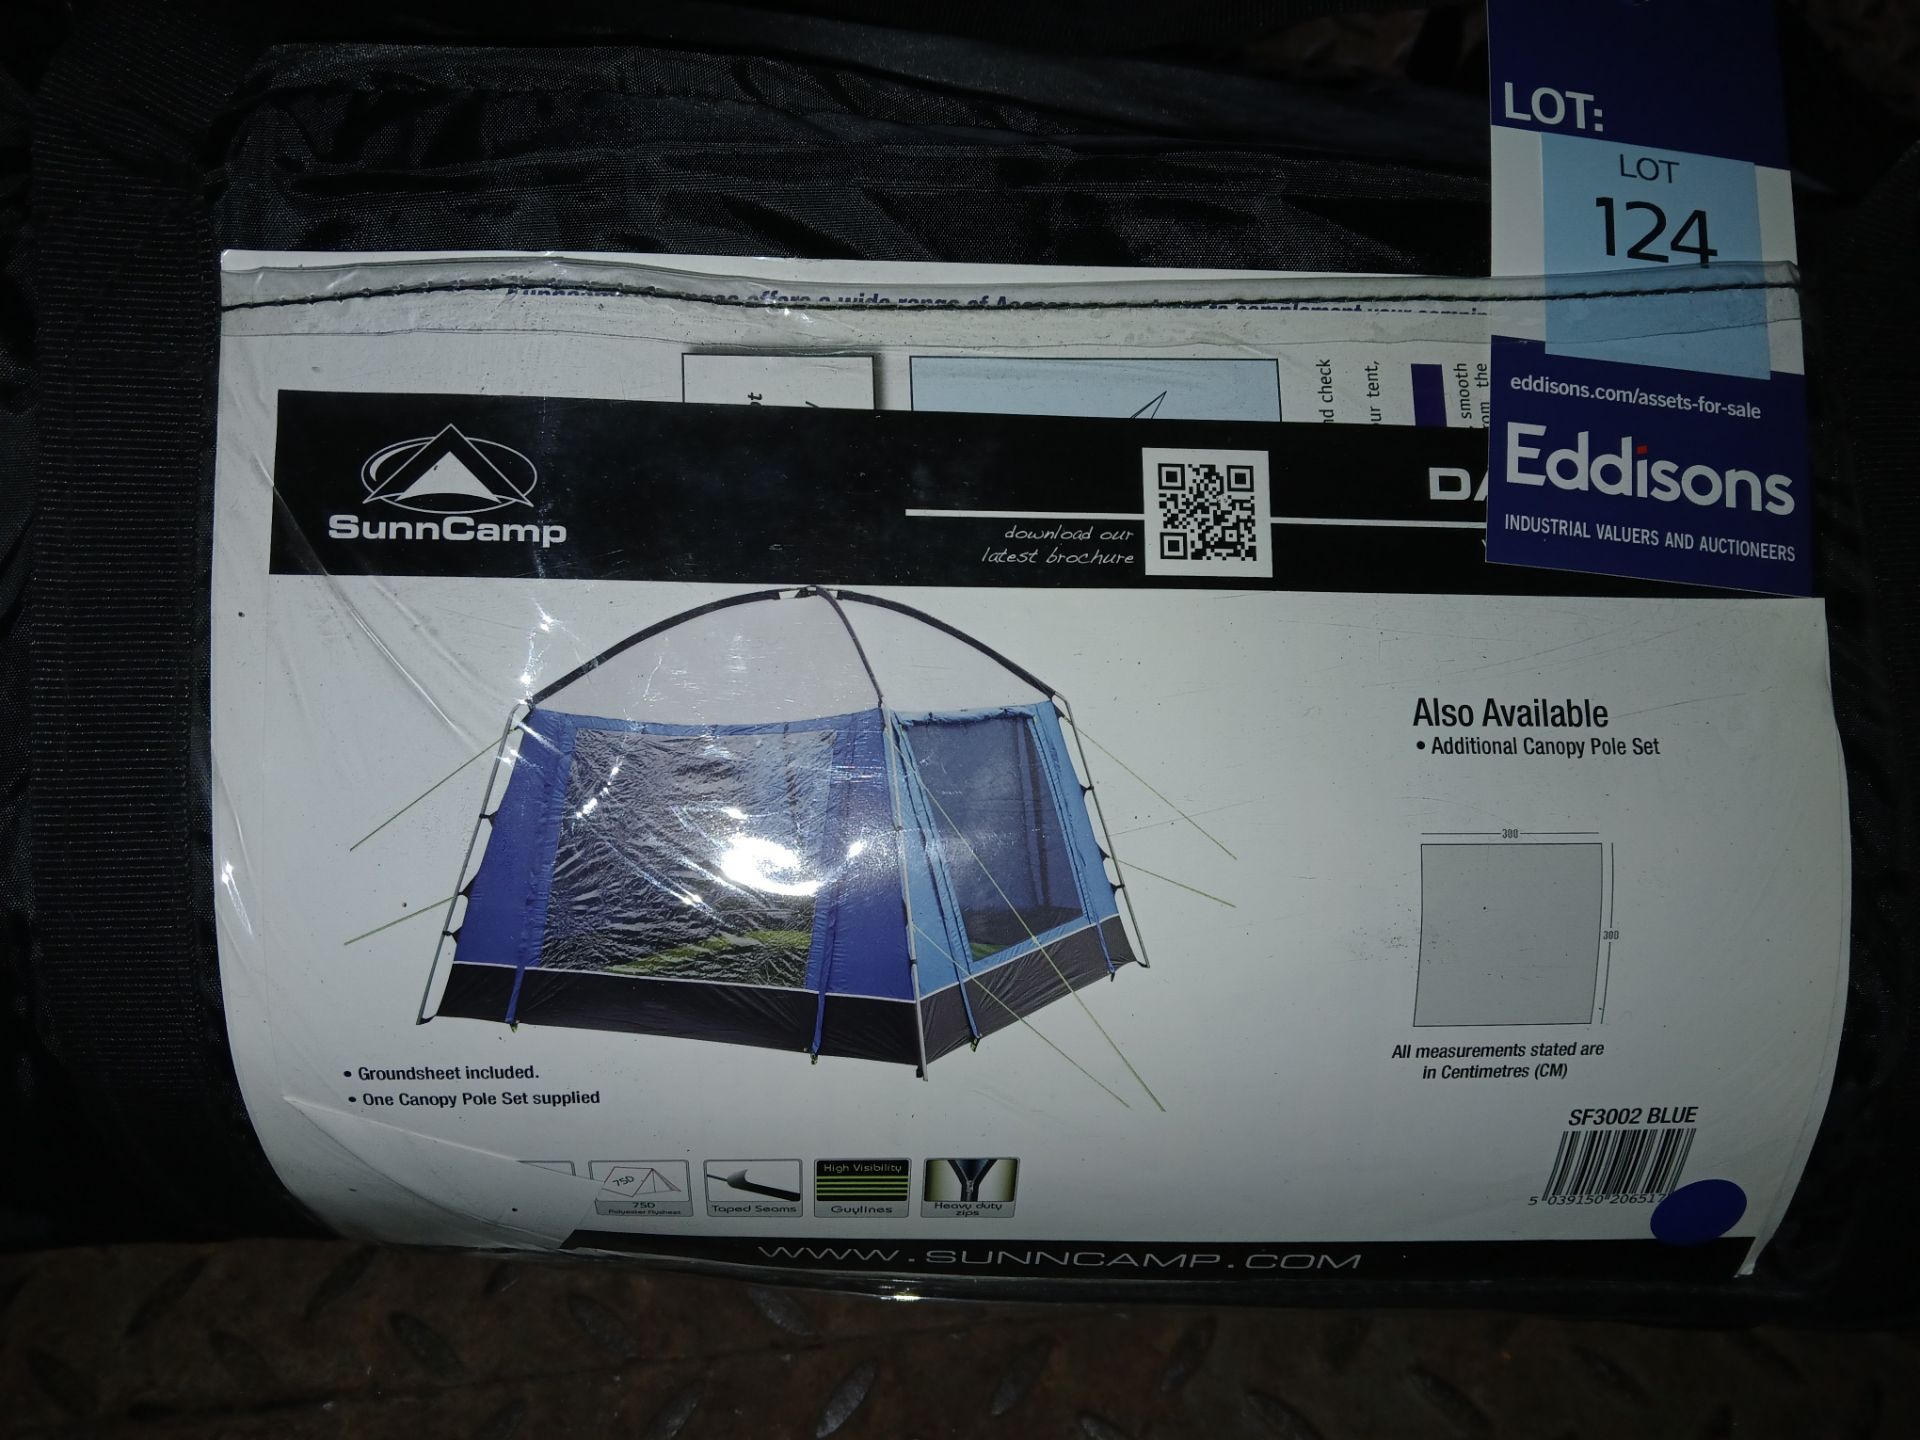 Sunncamp Dayroom Versatile Utility Tent (Please note, Viewing Strongly Recommended - Eddisons have - Image 2 of 3